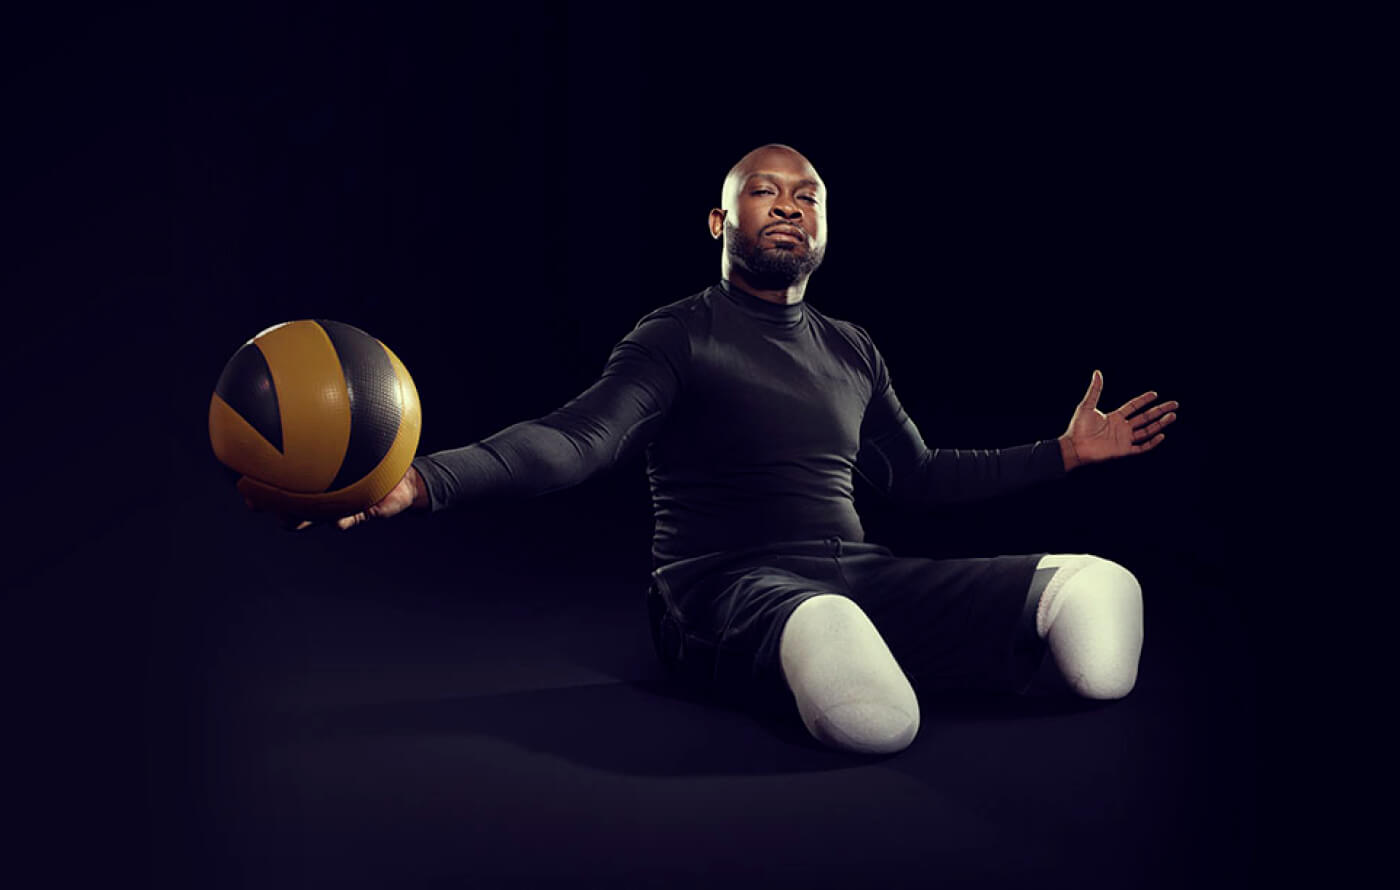 Full screen image of a black male basketball player, ball in hand, on a black background